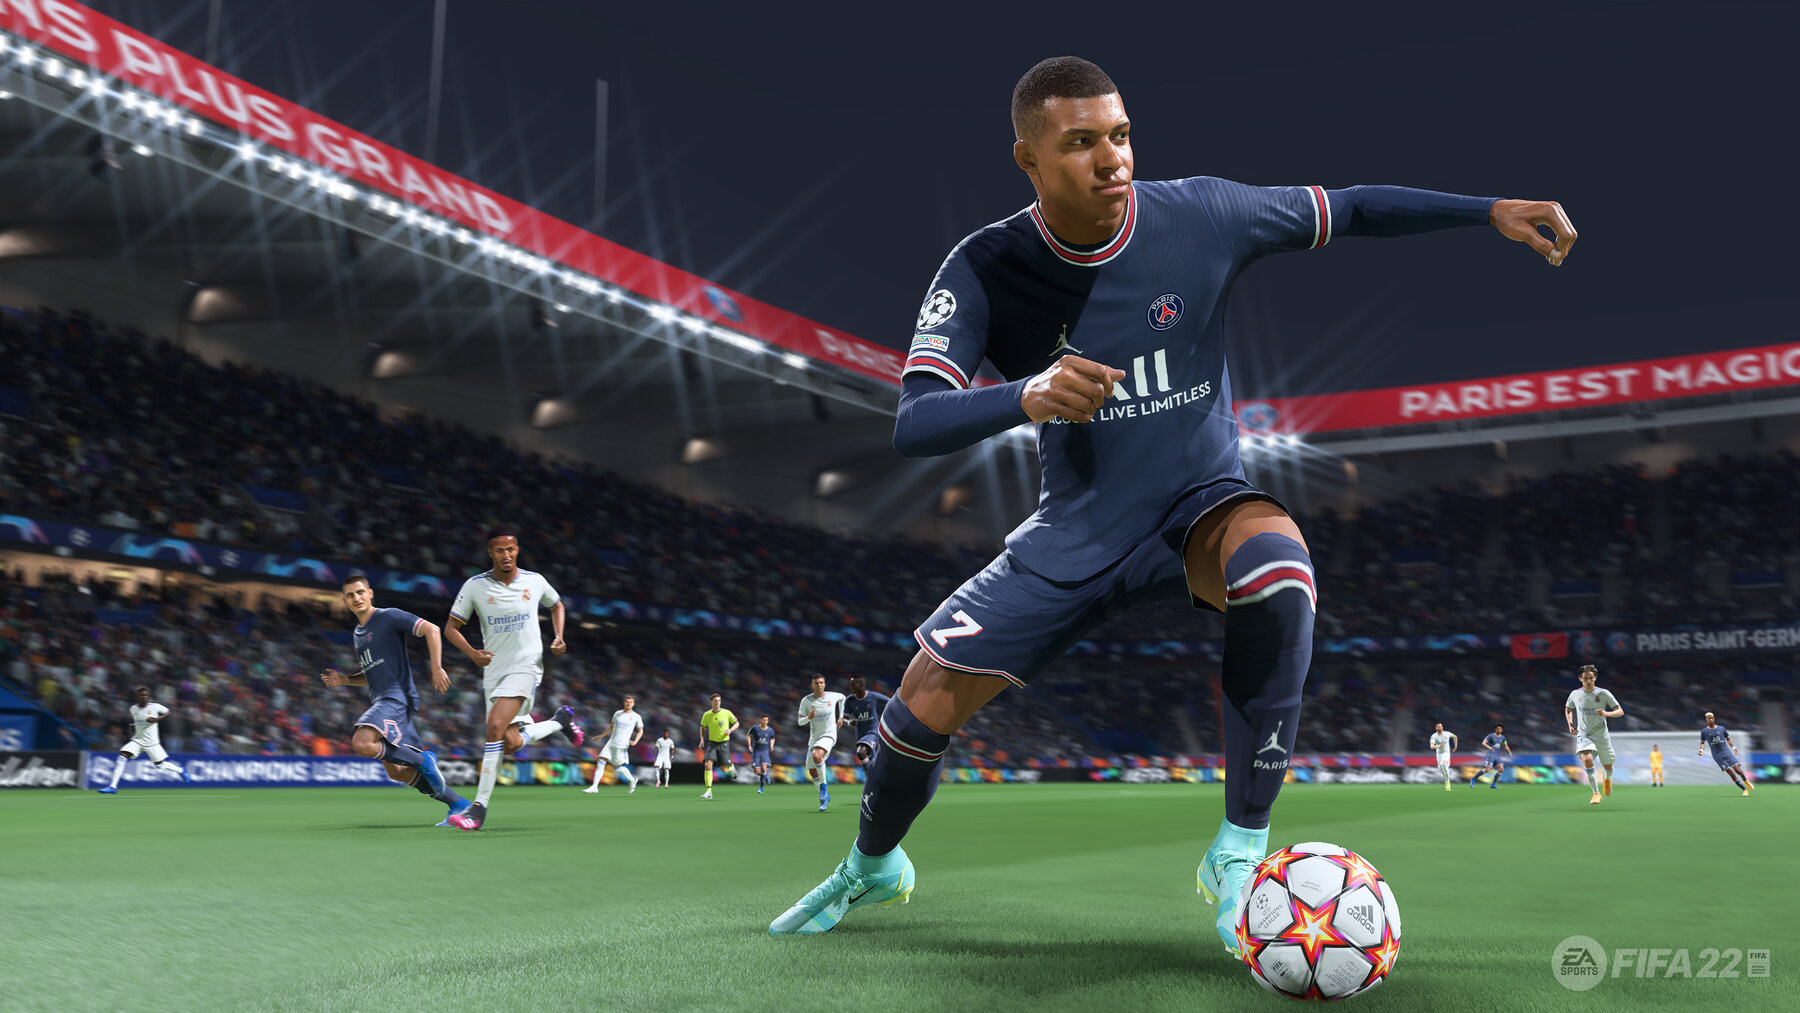 FIFA 23's successor will change its name

